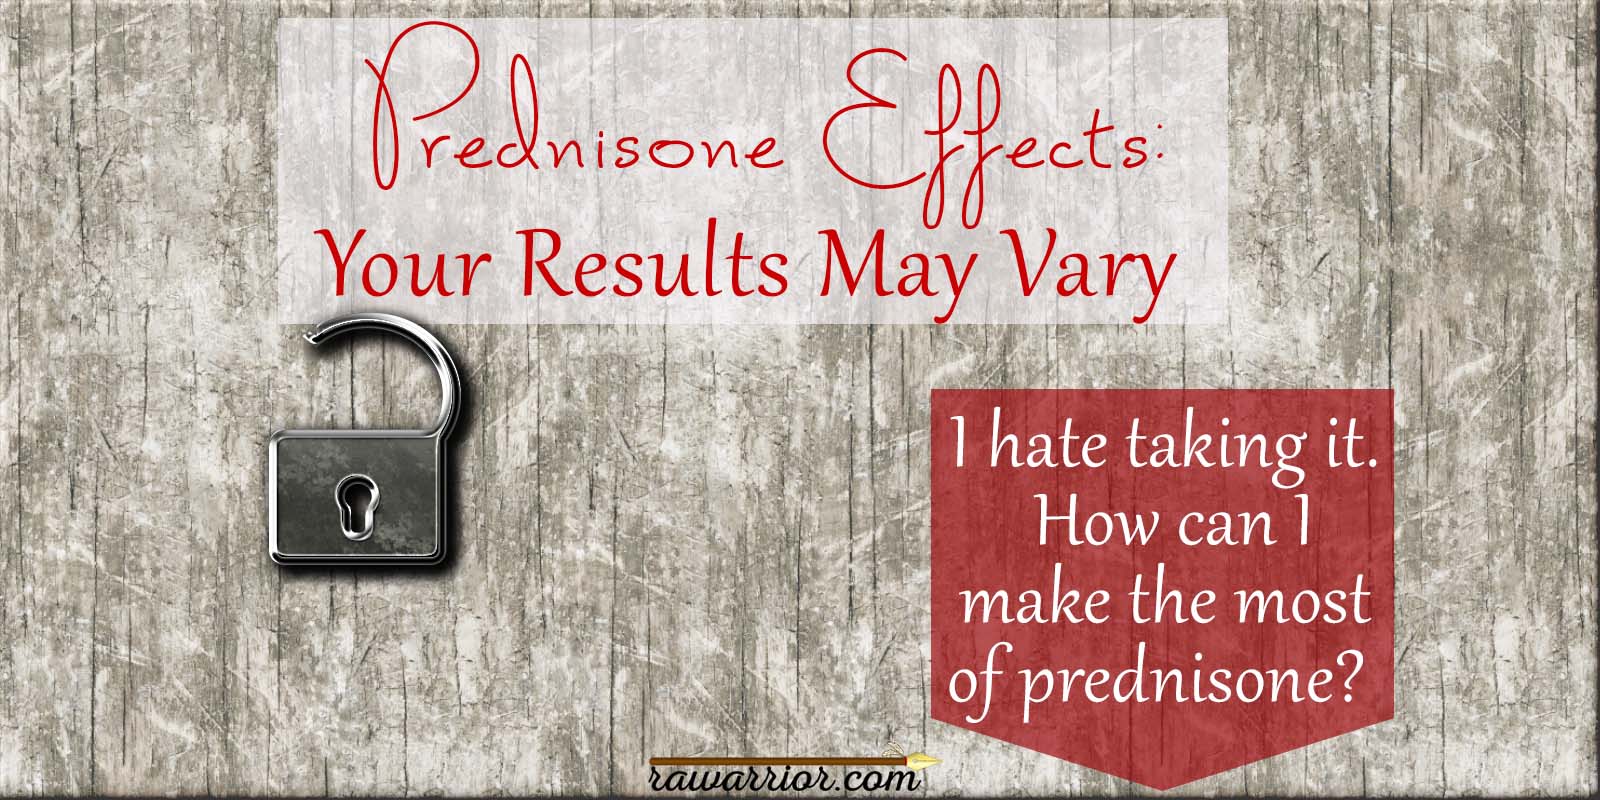 Prednisone Effects: Your Results May Vary